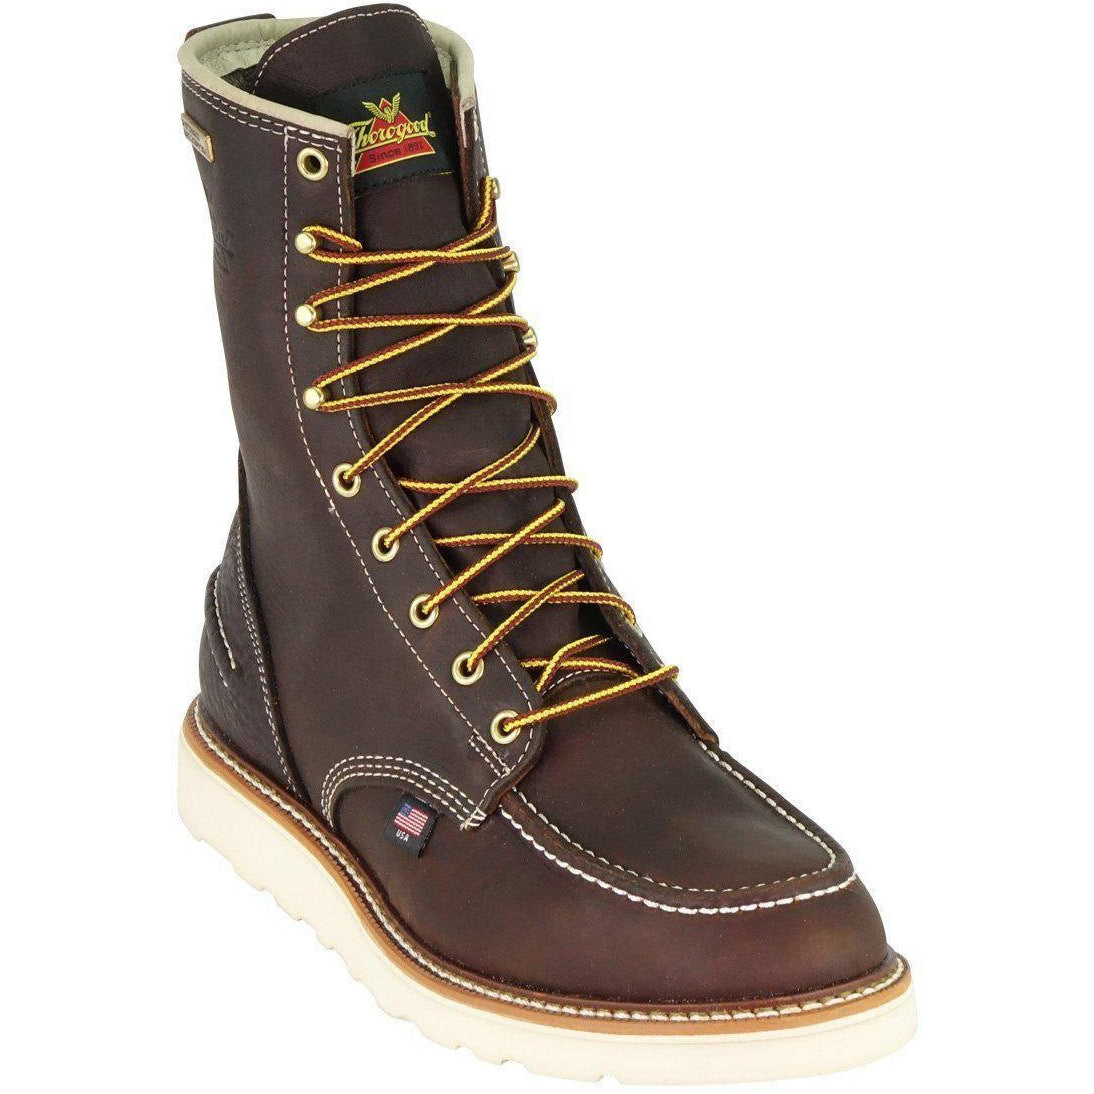 Thorogood Men's USA Made 1957 8" Moc Safety Toe WP Wedge Work Boot 804-3800  - Overlook Boots